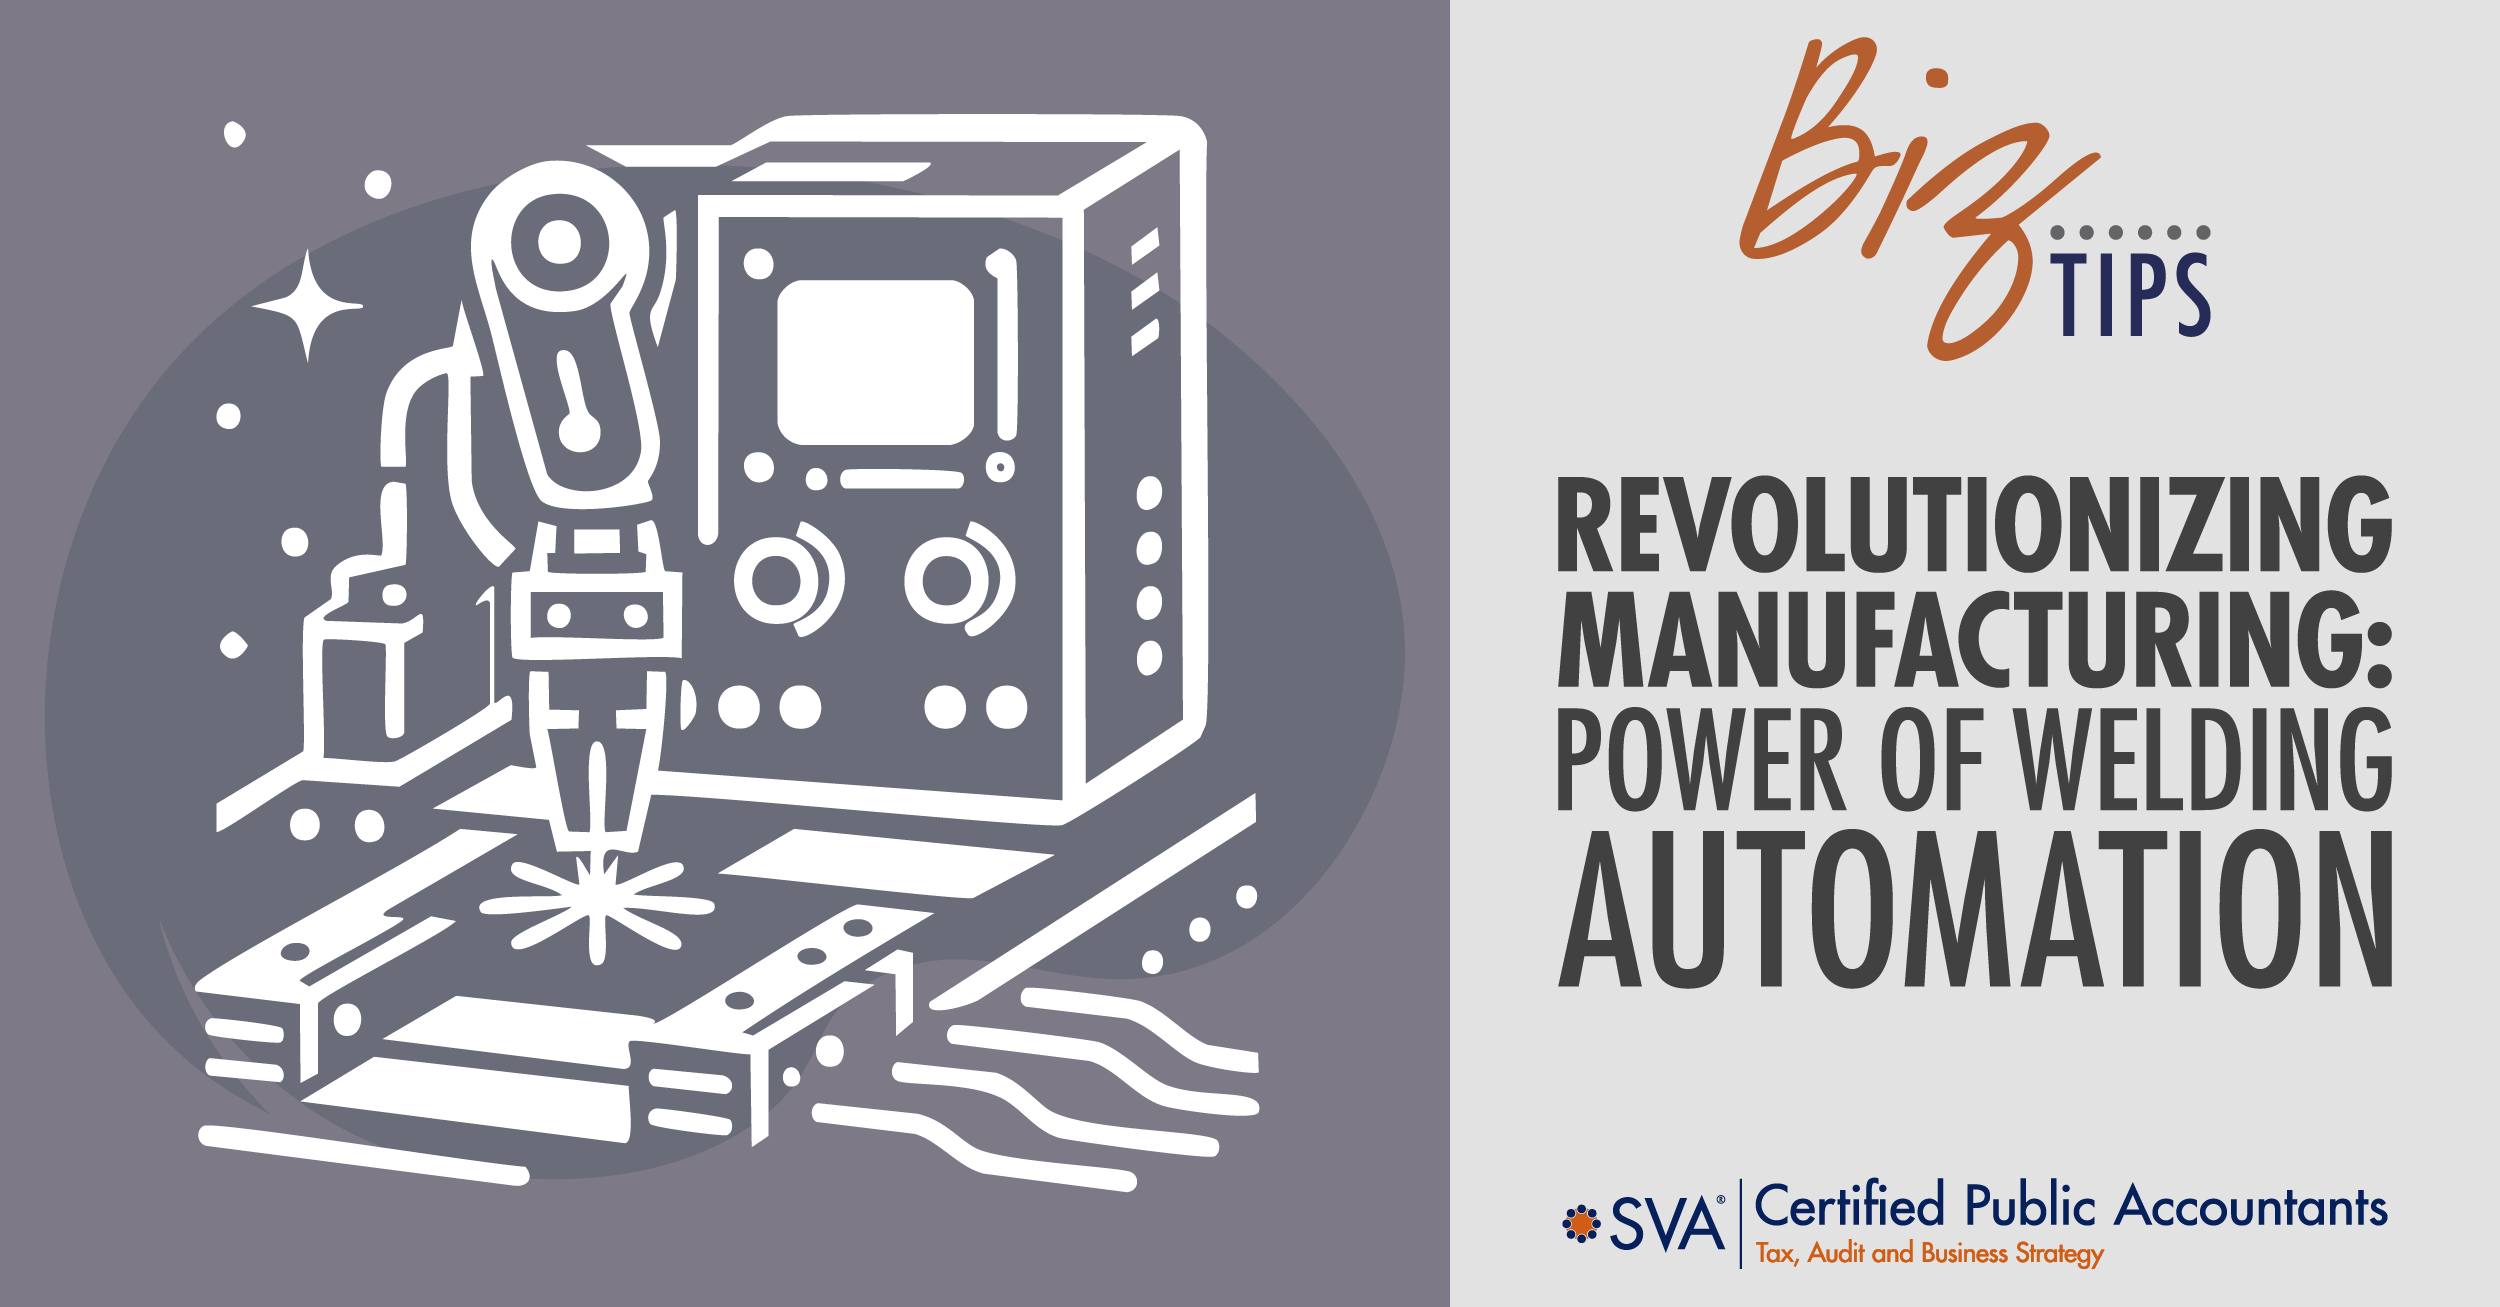 Revolutionizing Manufacturing: Power of Welding Automation